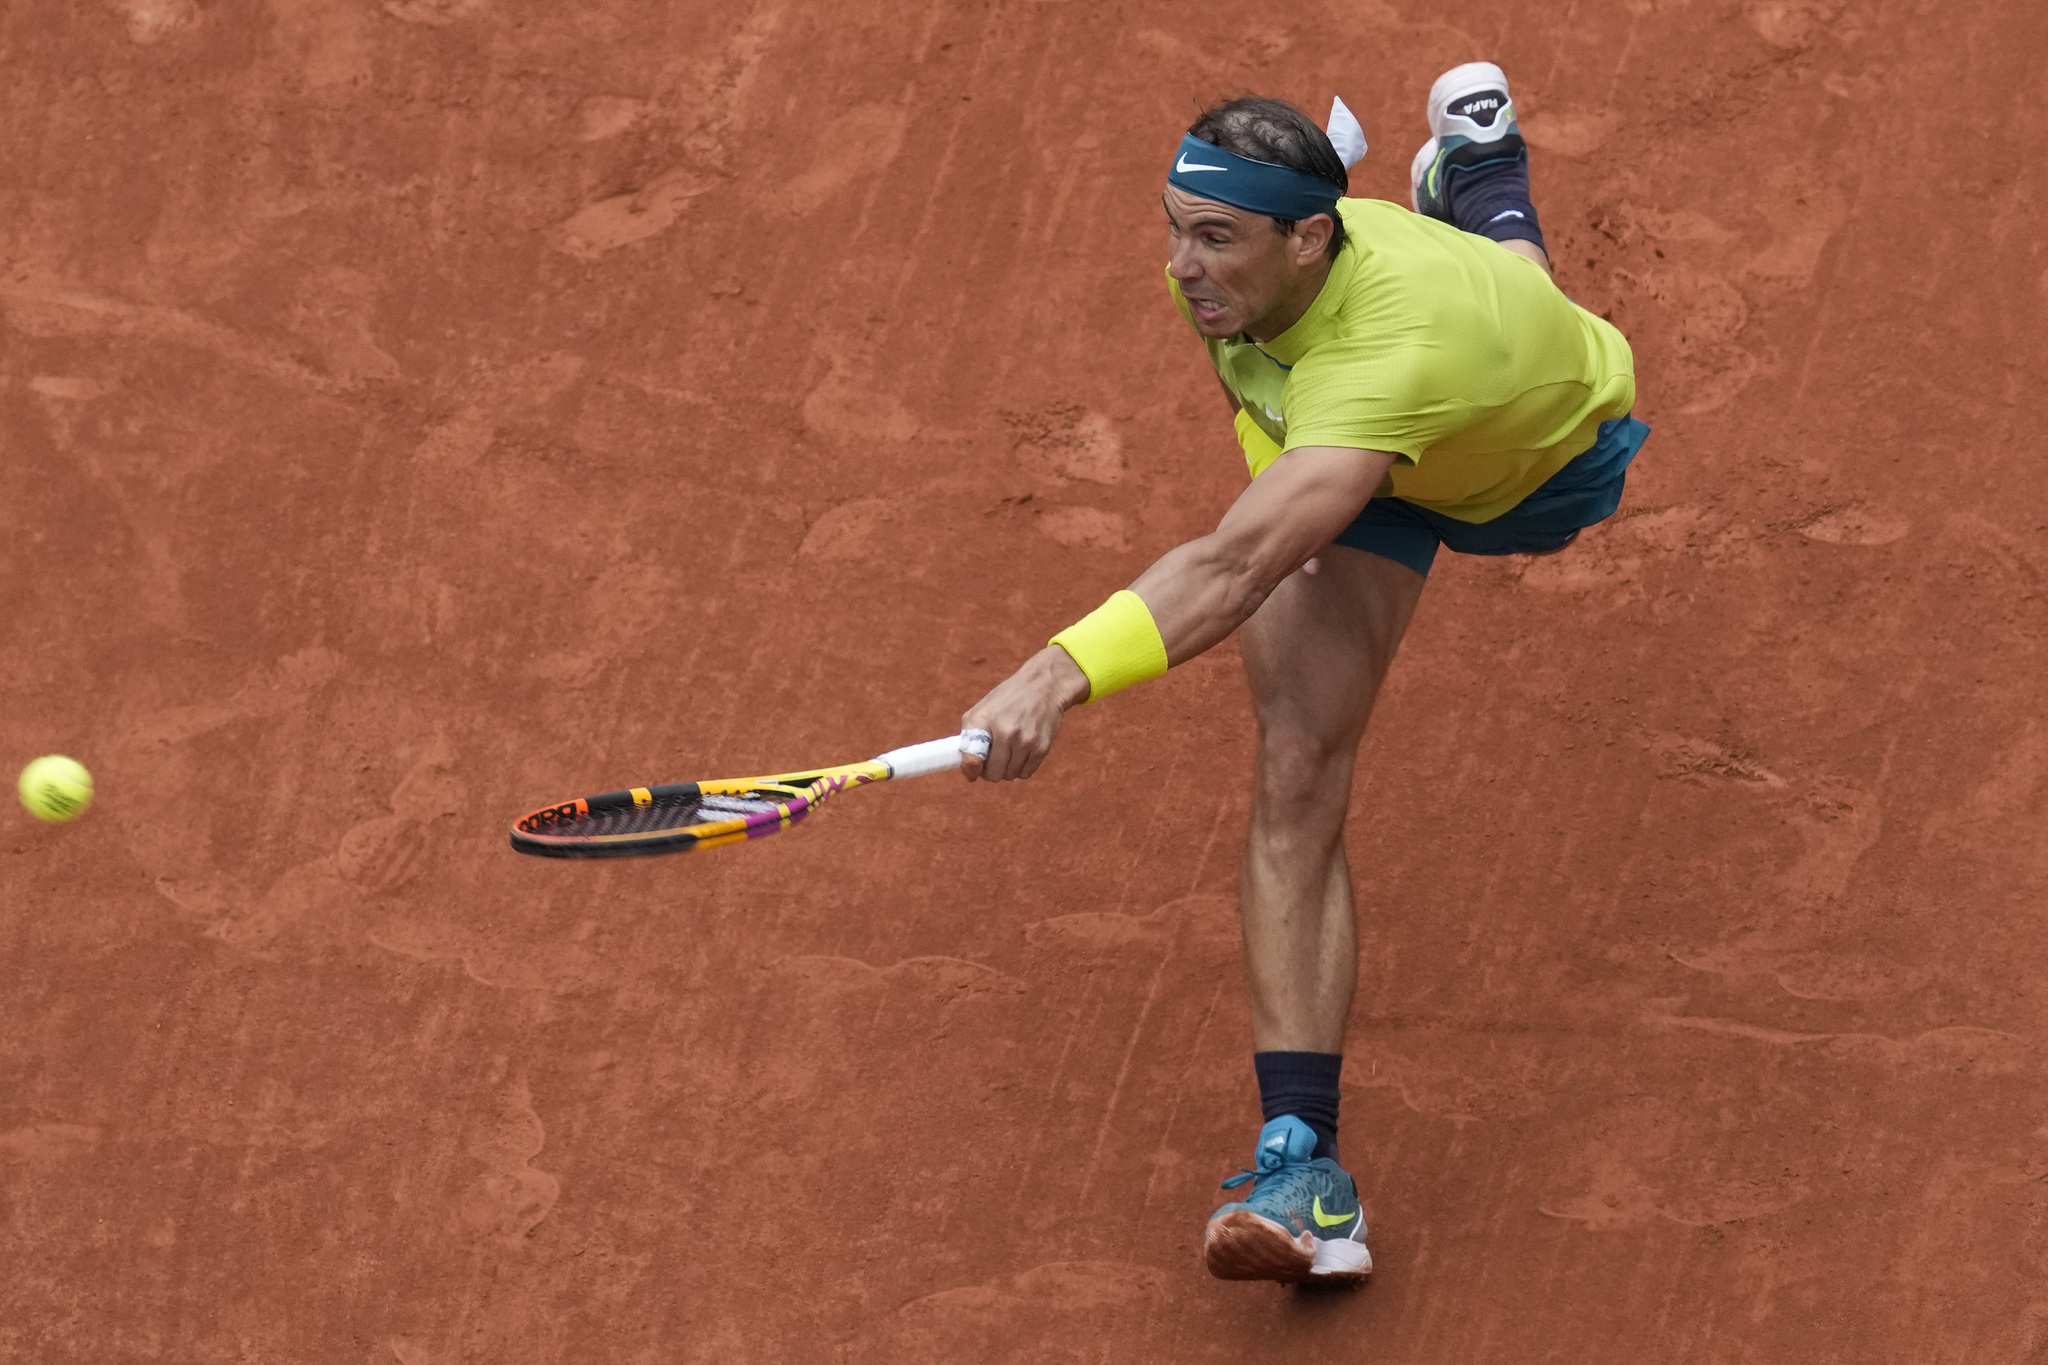 Spain's Rafael  lt;HIT gt;Nadal lt;/HIT gt; plays a shot against Australia's Jordan Thompson during their first round match at the French Open tennis tournament in Roland Garros stadium in Paris, France, Monday, May 23, 2022. (AP Photo/Christophe Ena)